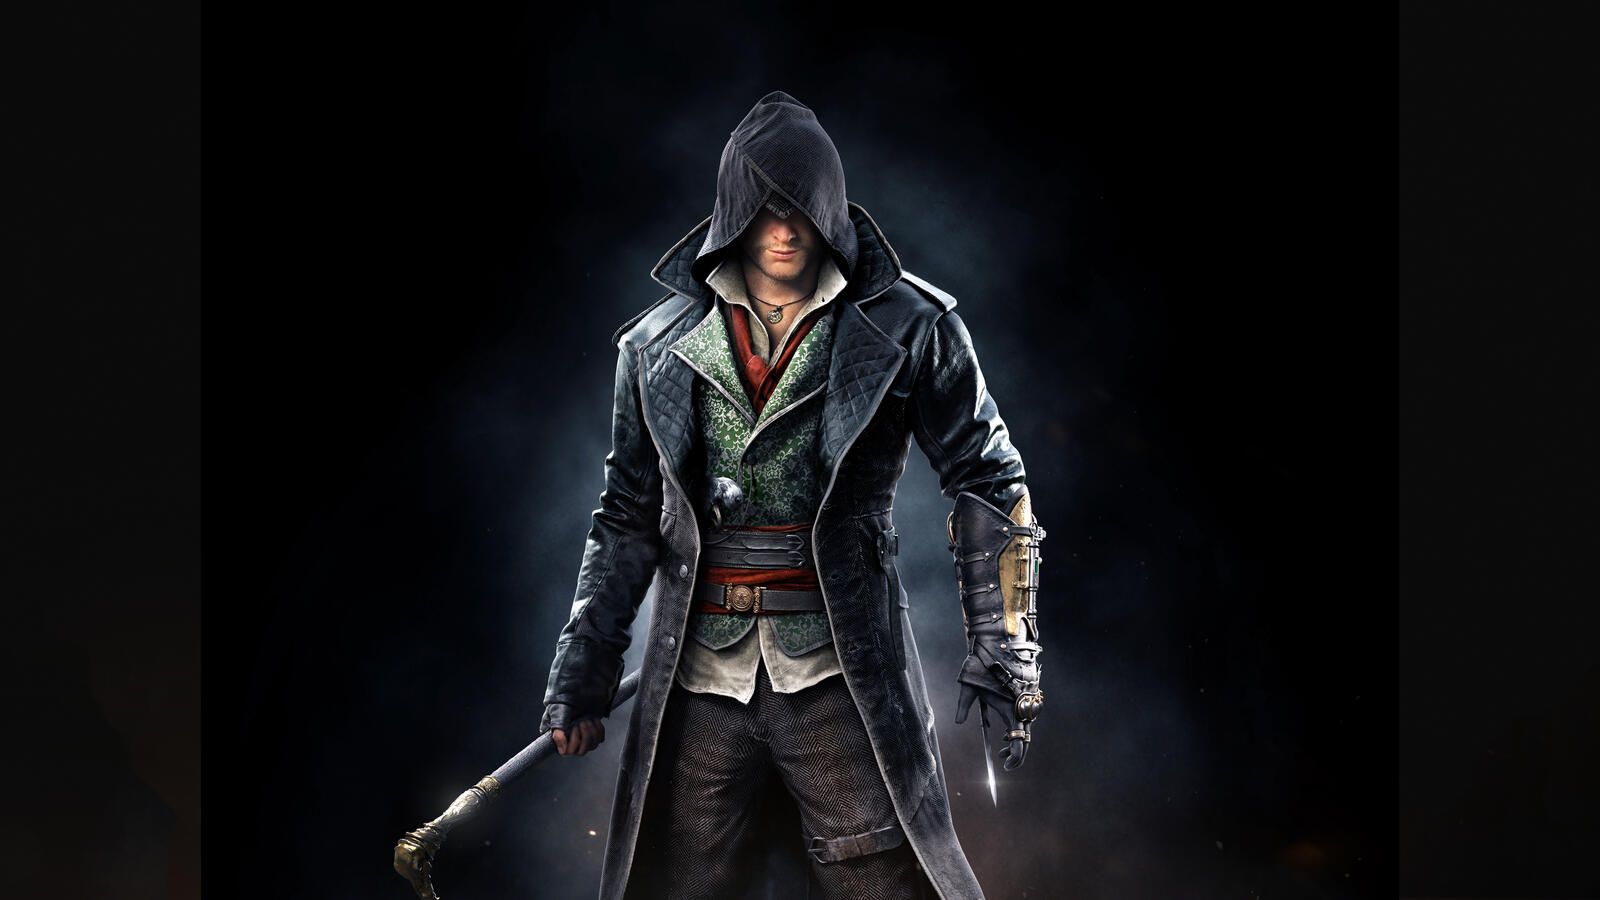 Wallpapers assassins creed syndicate assassins creed game on the desktop